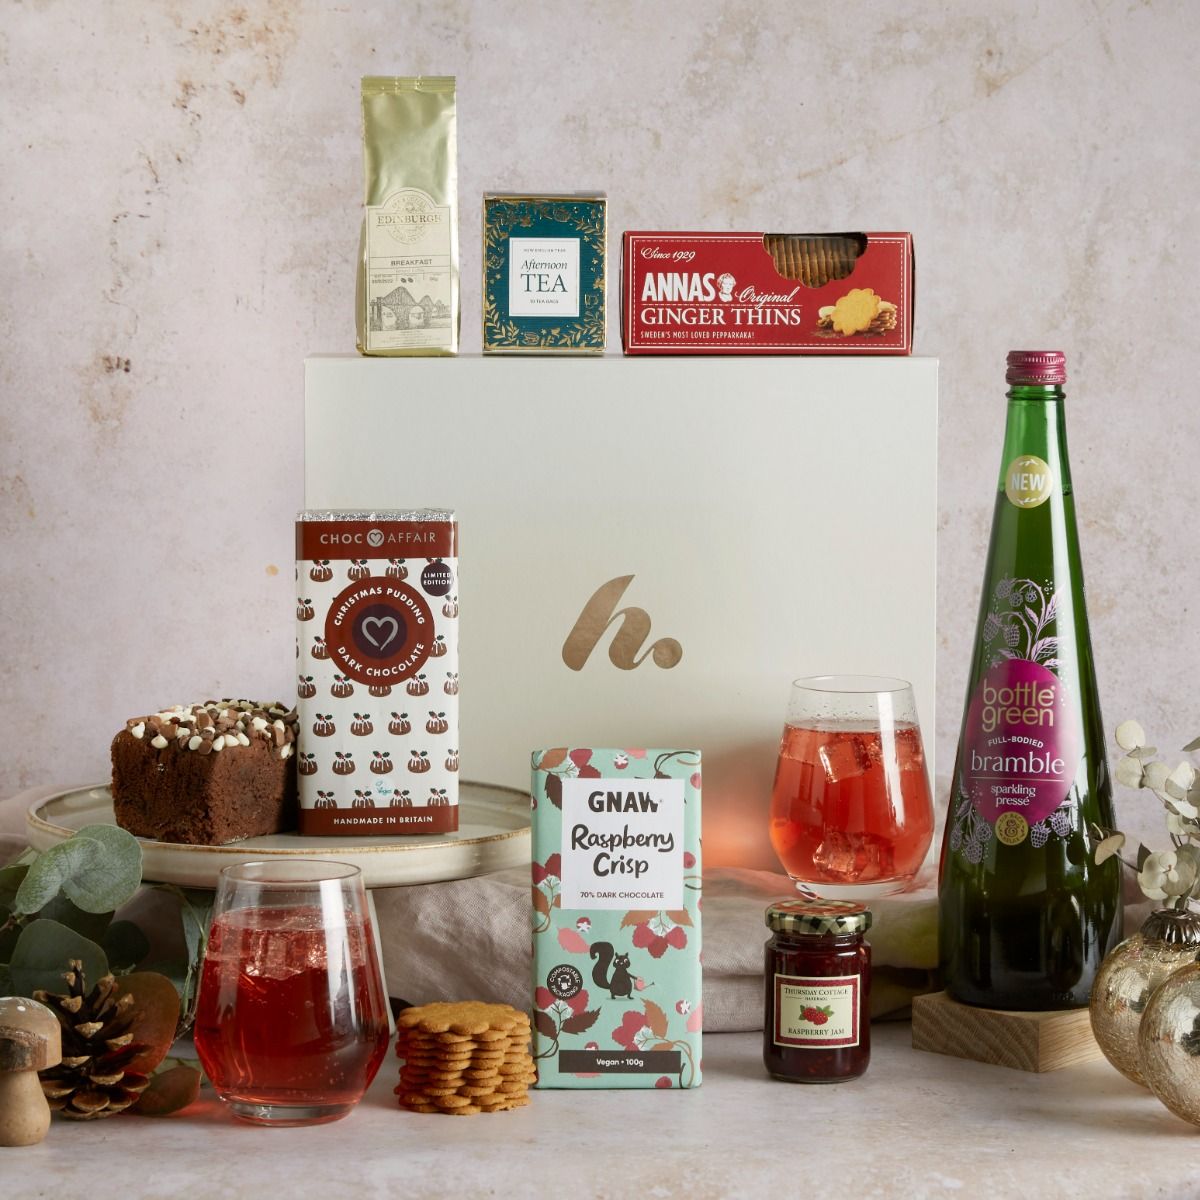 The Christmas alcohol free favourites hamper with contents on display and signature gift box